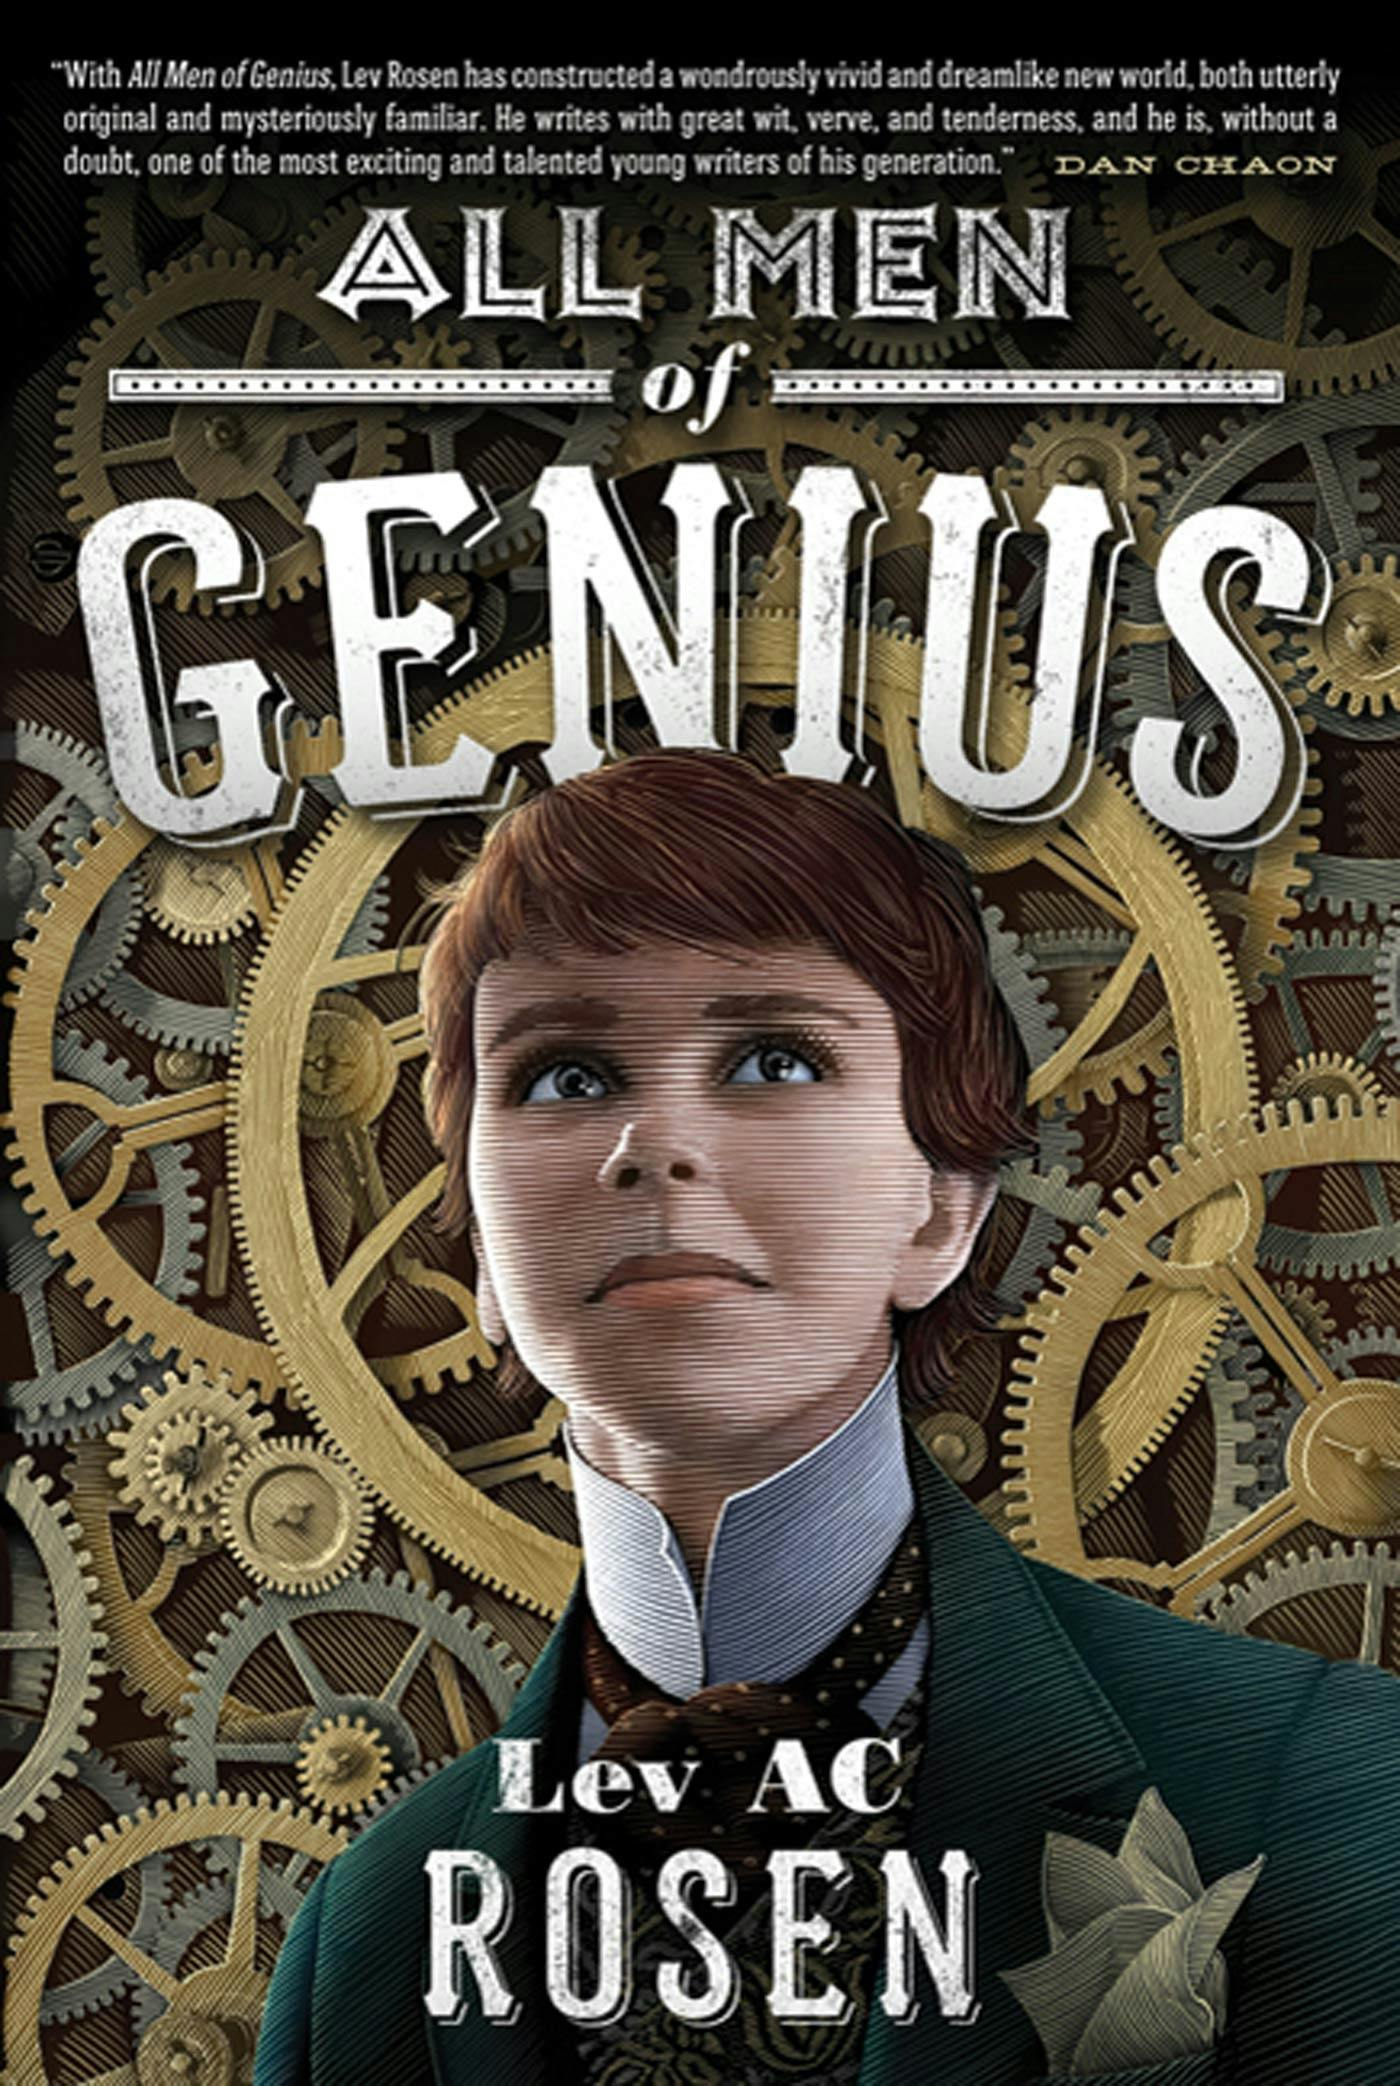 Cover for the book titled as: All Men of Genius